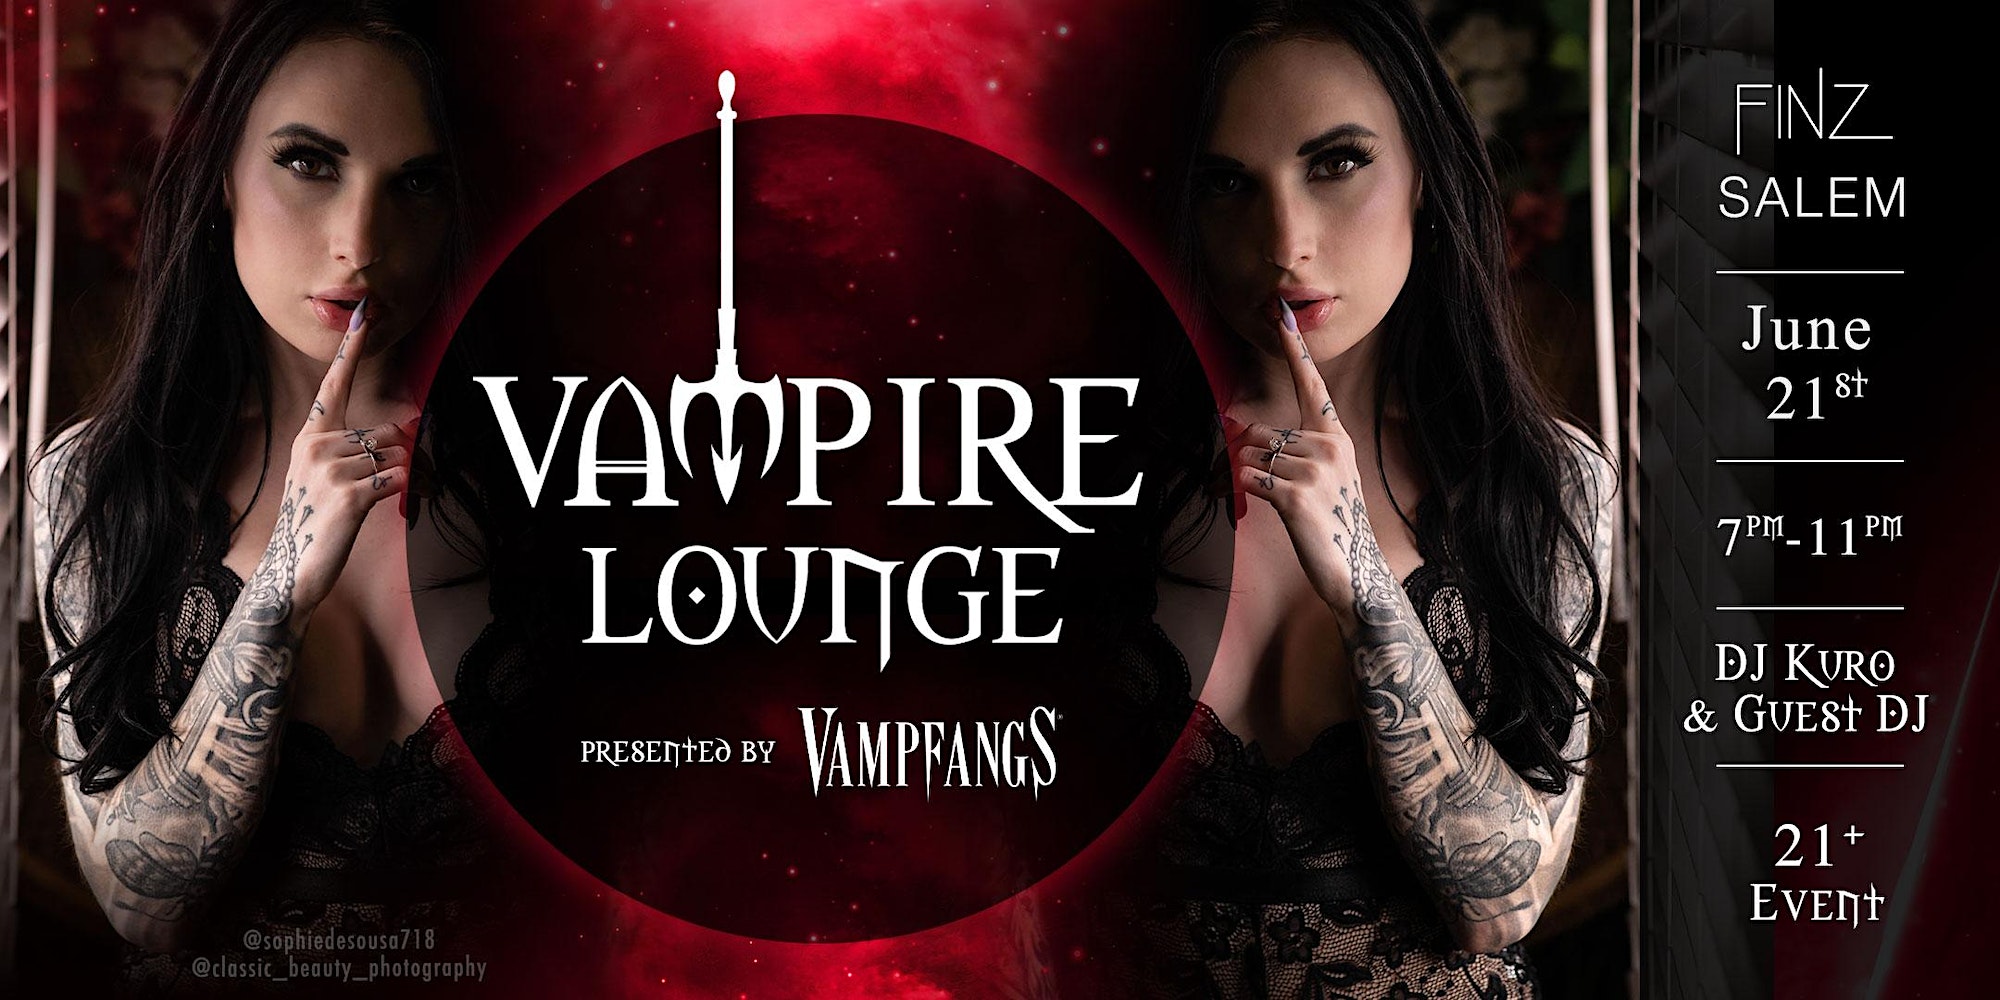 a flyer for a vampire lounge party.